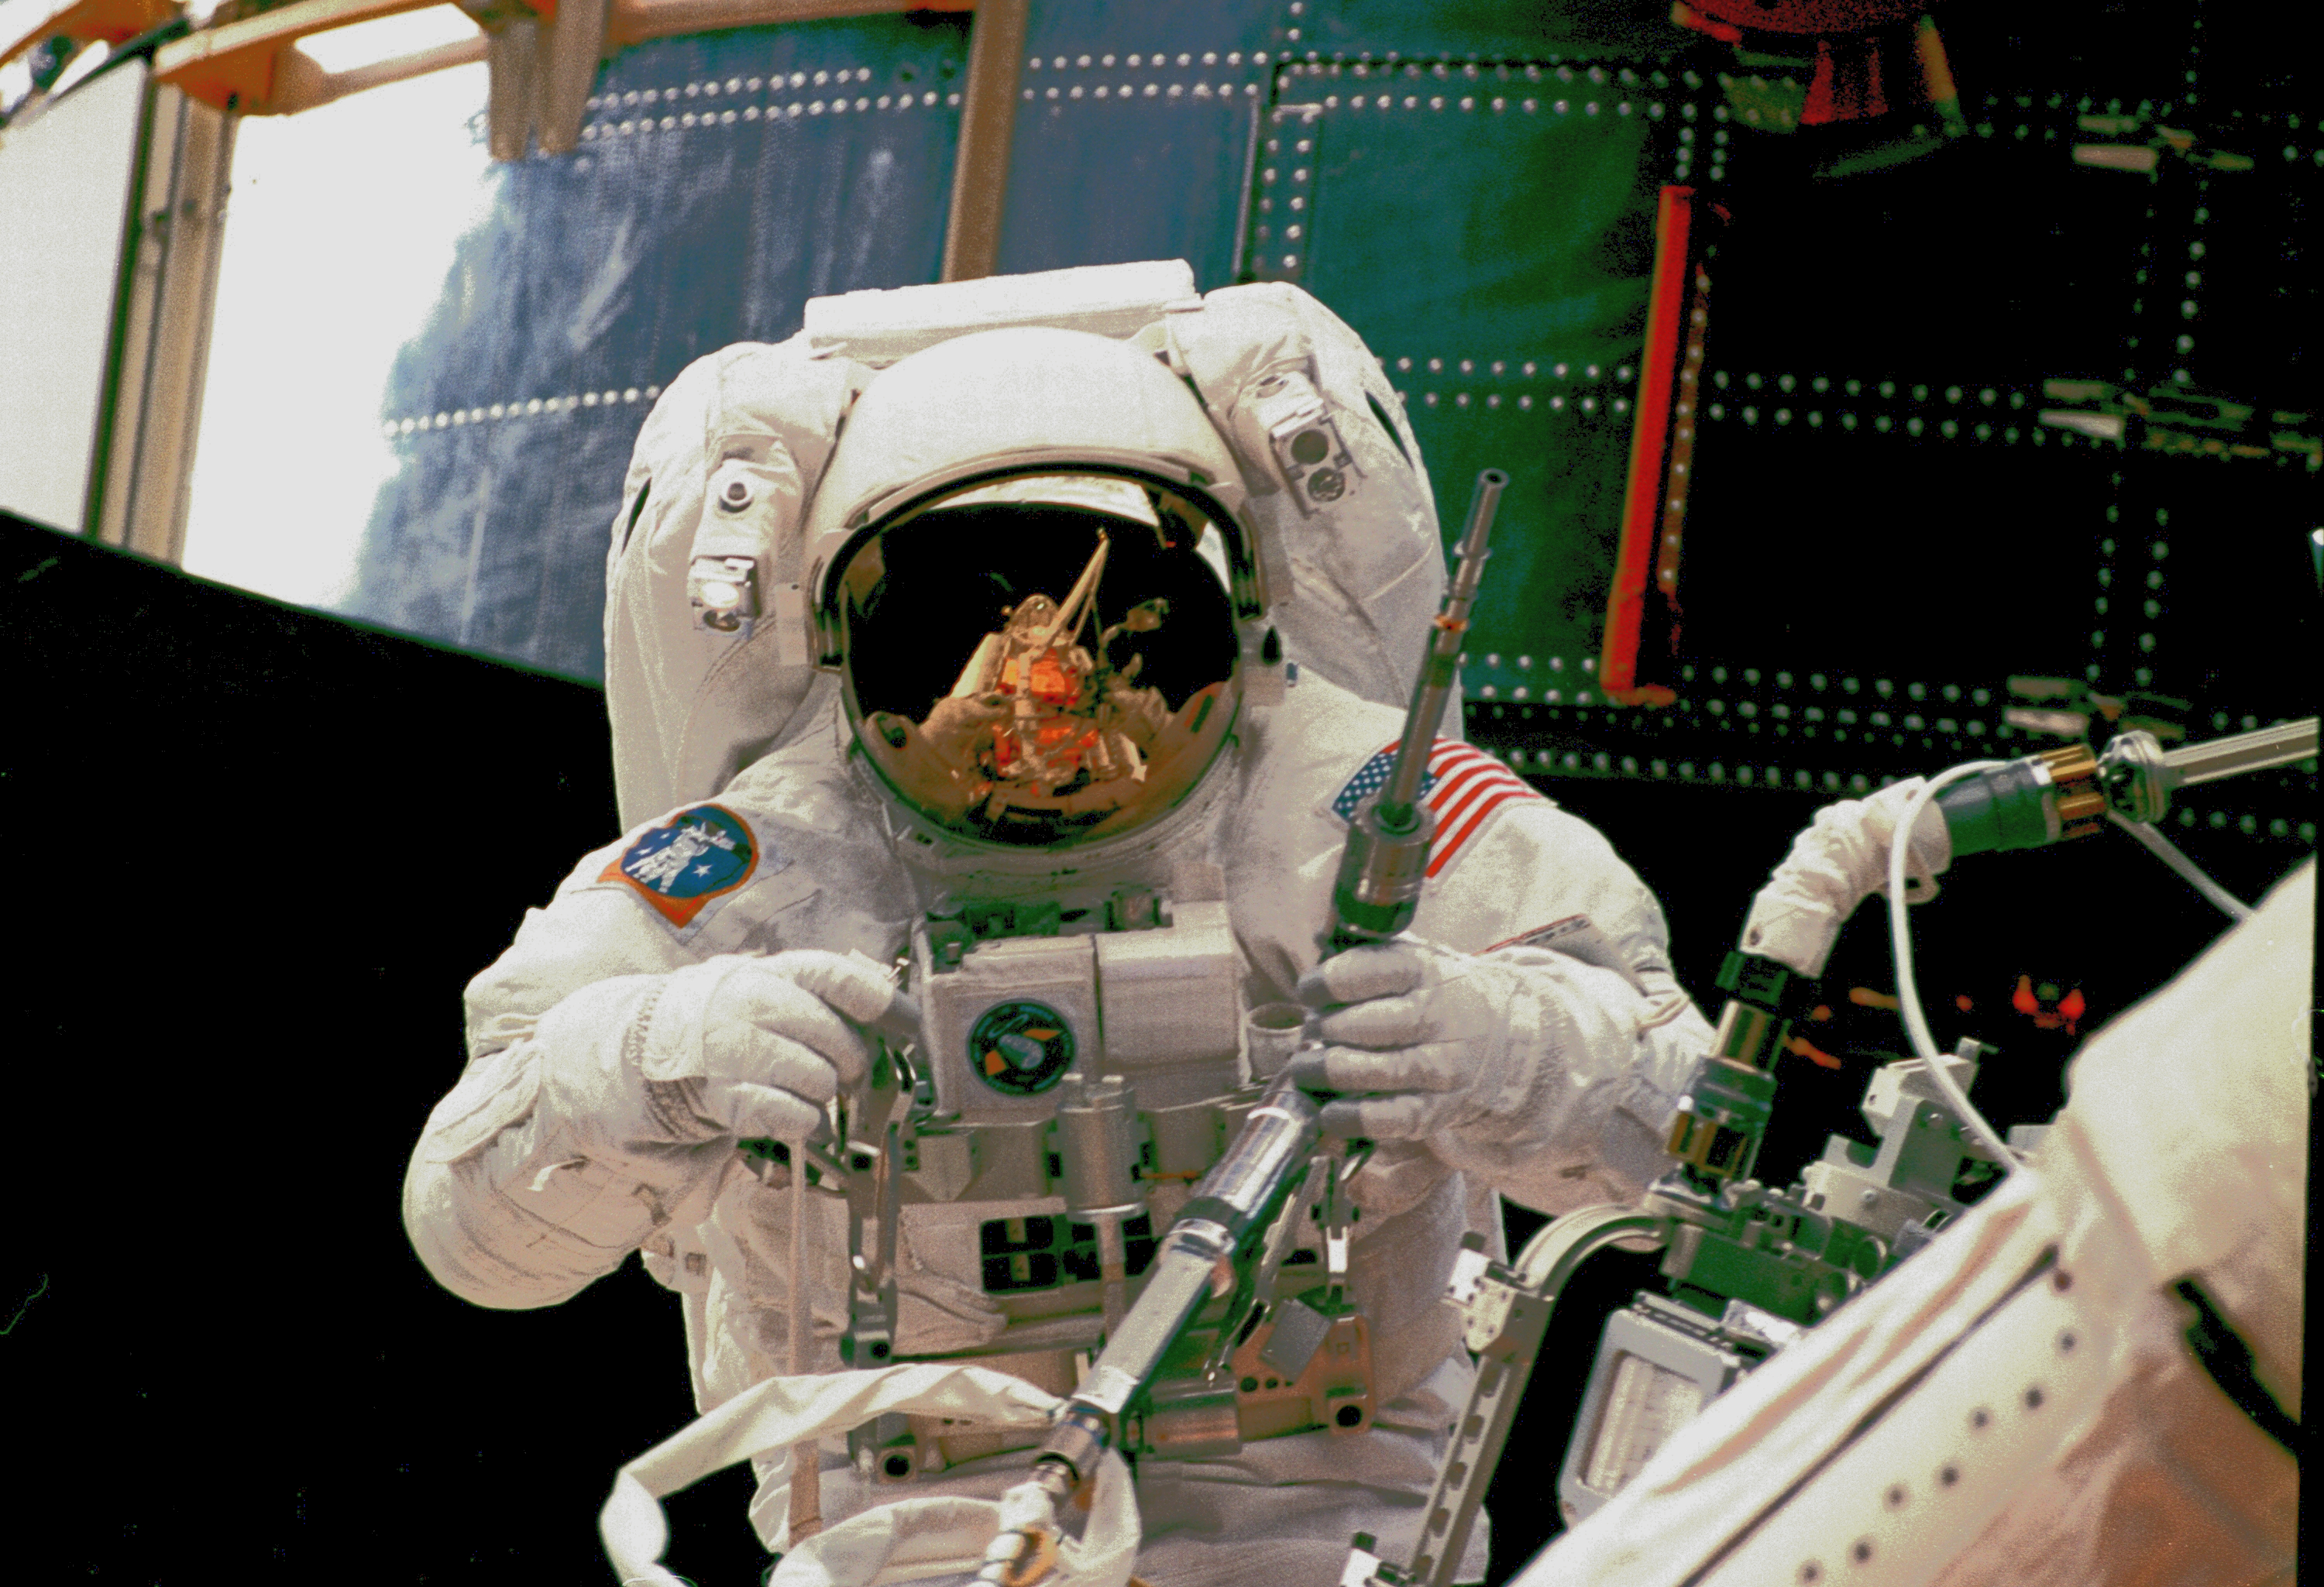 An astronaut with a power ratchet in one hand in front of Hubble. The shuttle cargo bay, gold carriers, and robotic arm are reflected in his visor.